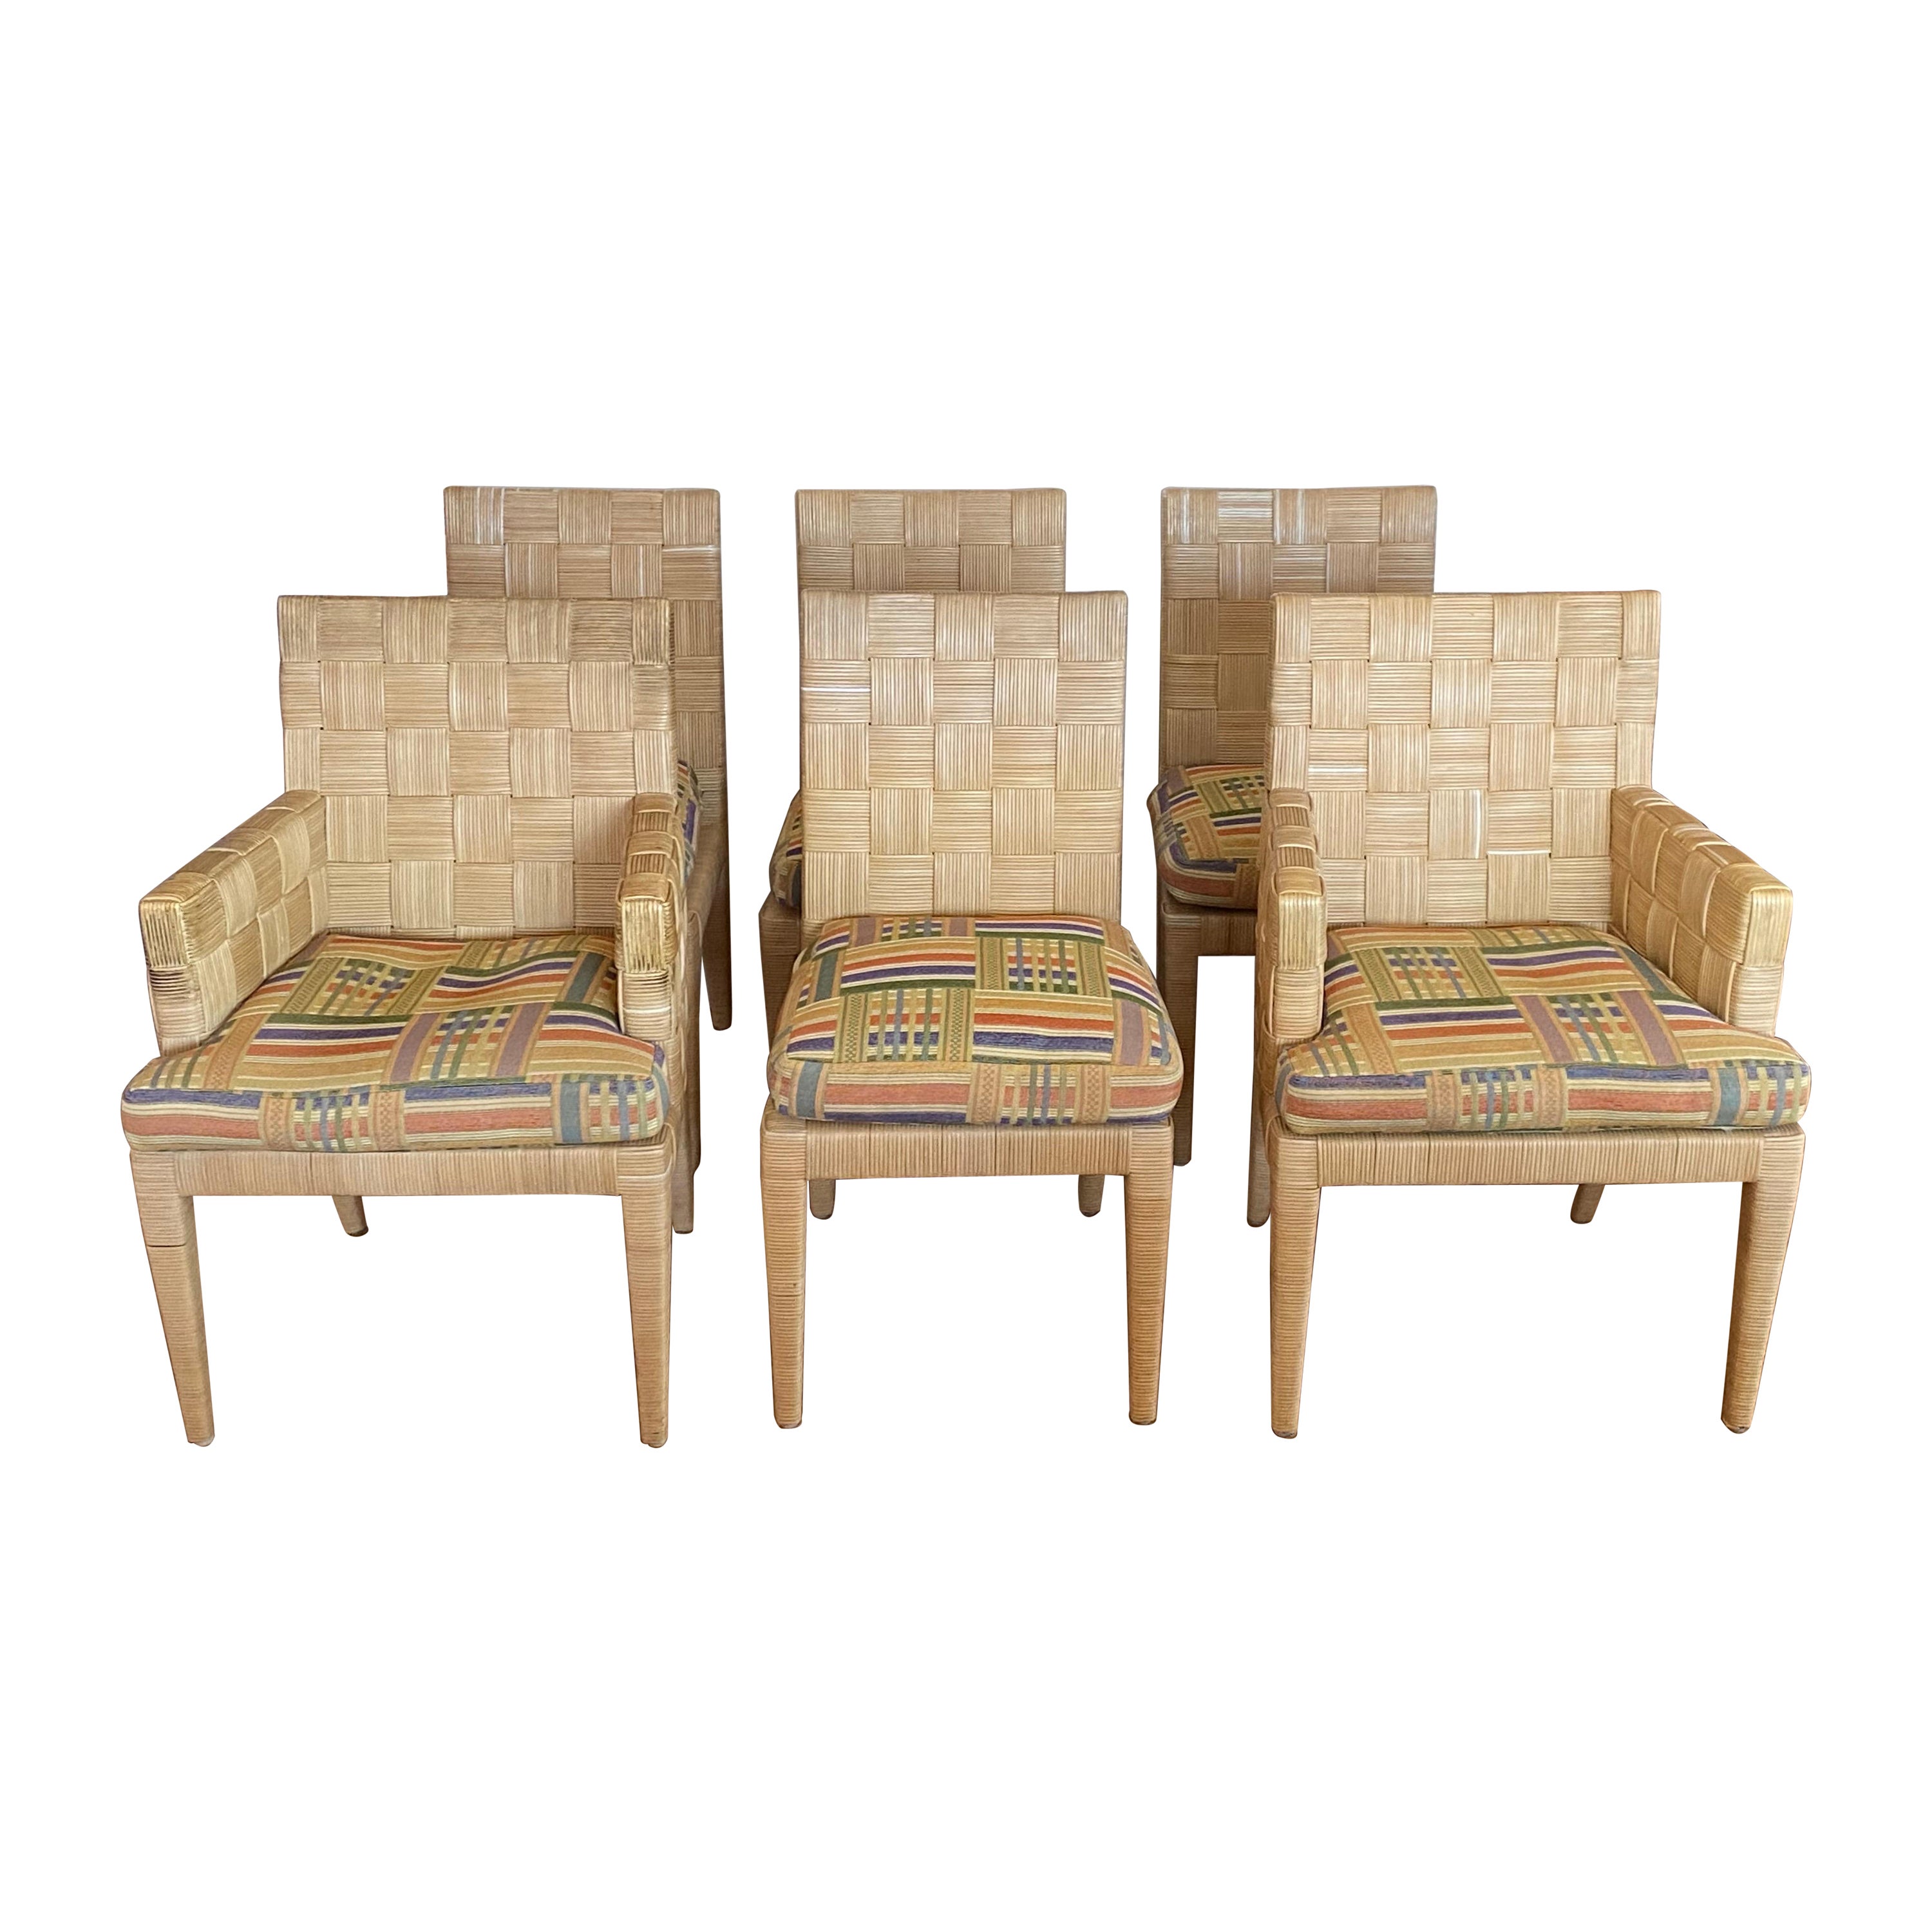 Set of Six Block Island Caned Dining Room Chairs by John Hutton for Donghia 